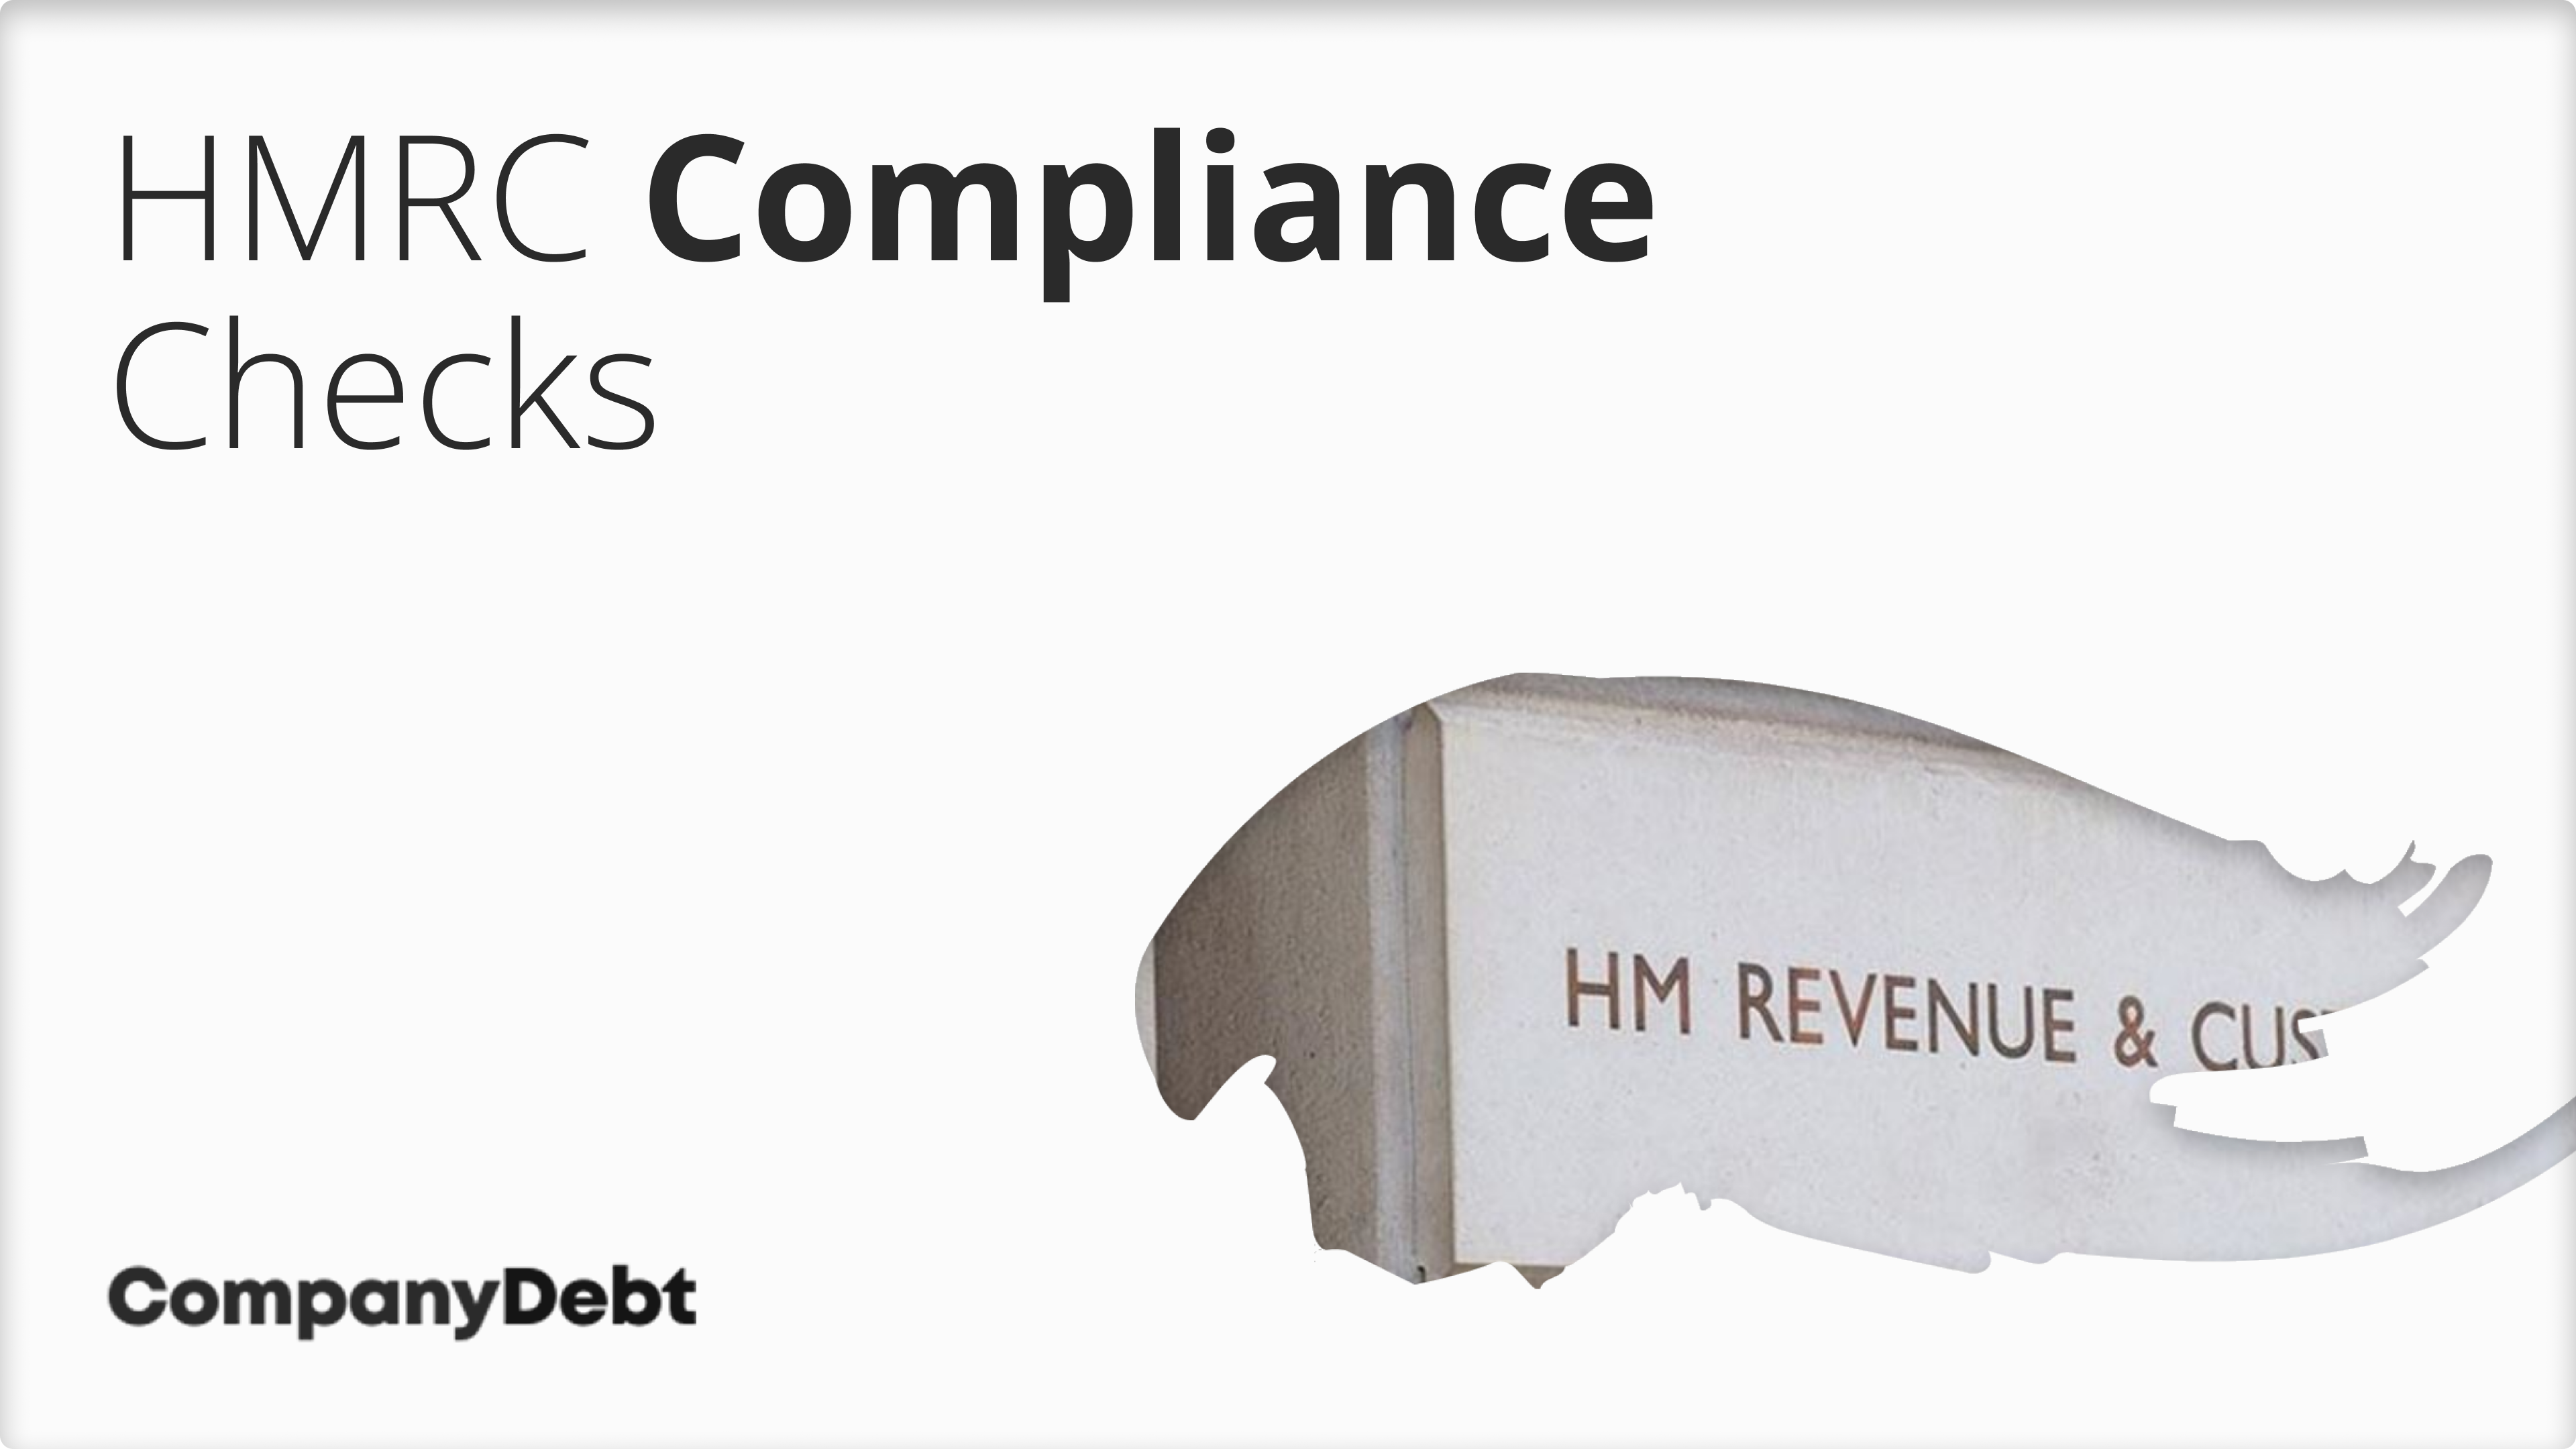 What-Should-you-do-if-HMRC-Contacts-you-About-a-Compliance-Check_